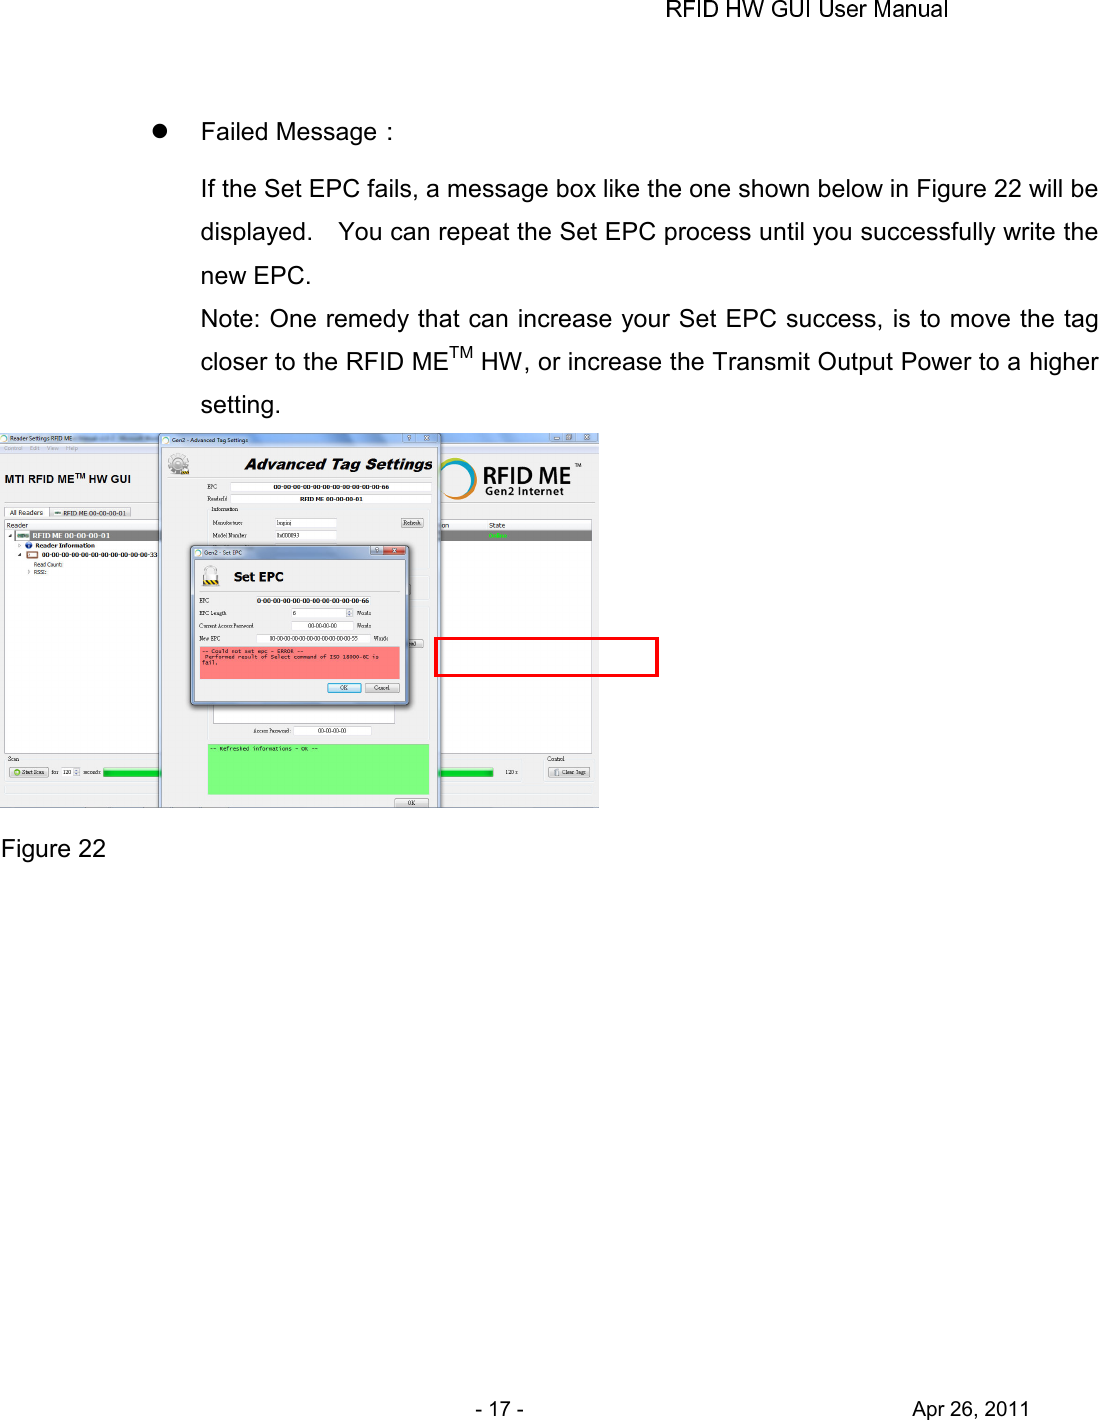       - 17 -                                     Apr 26, 2011    Failed Message： If the Set EPC fails, a message box like the one shown below in Figure 22 will be displayed.    You can repeat the Set EPC process until you successfully write the new EPC. Note: One remedy that can increase your Set EPC success, is to move the tag closer to the RFID METM HW, or increase the Transmit Output Power to a higher setting.  Figure 22 